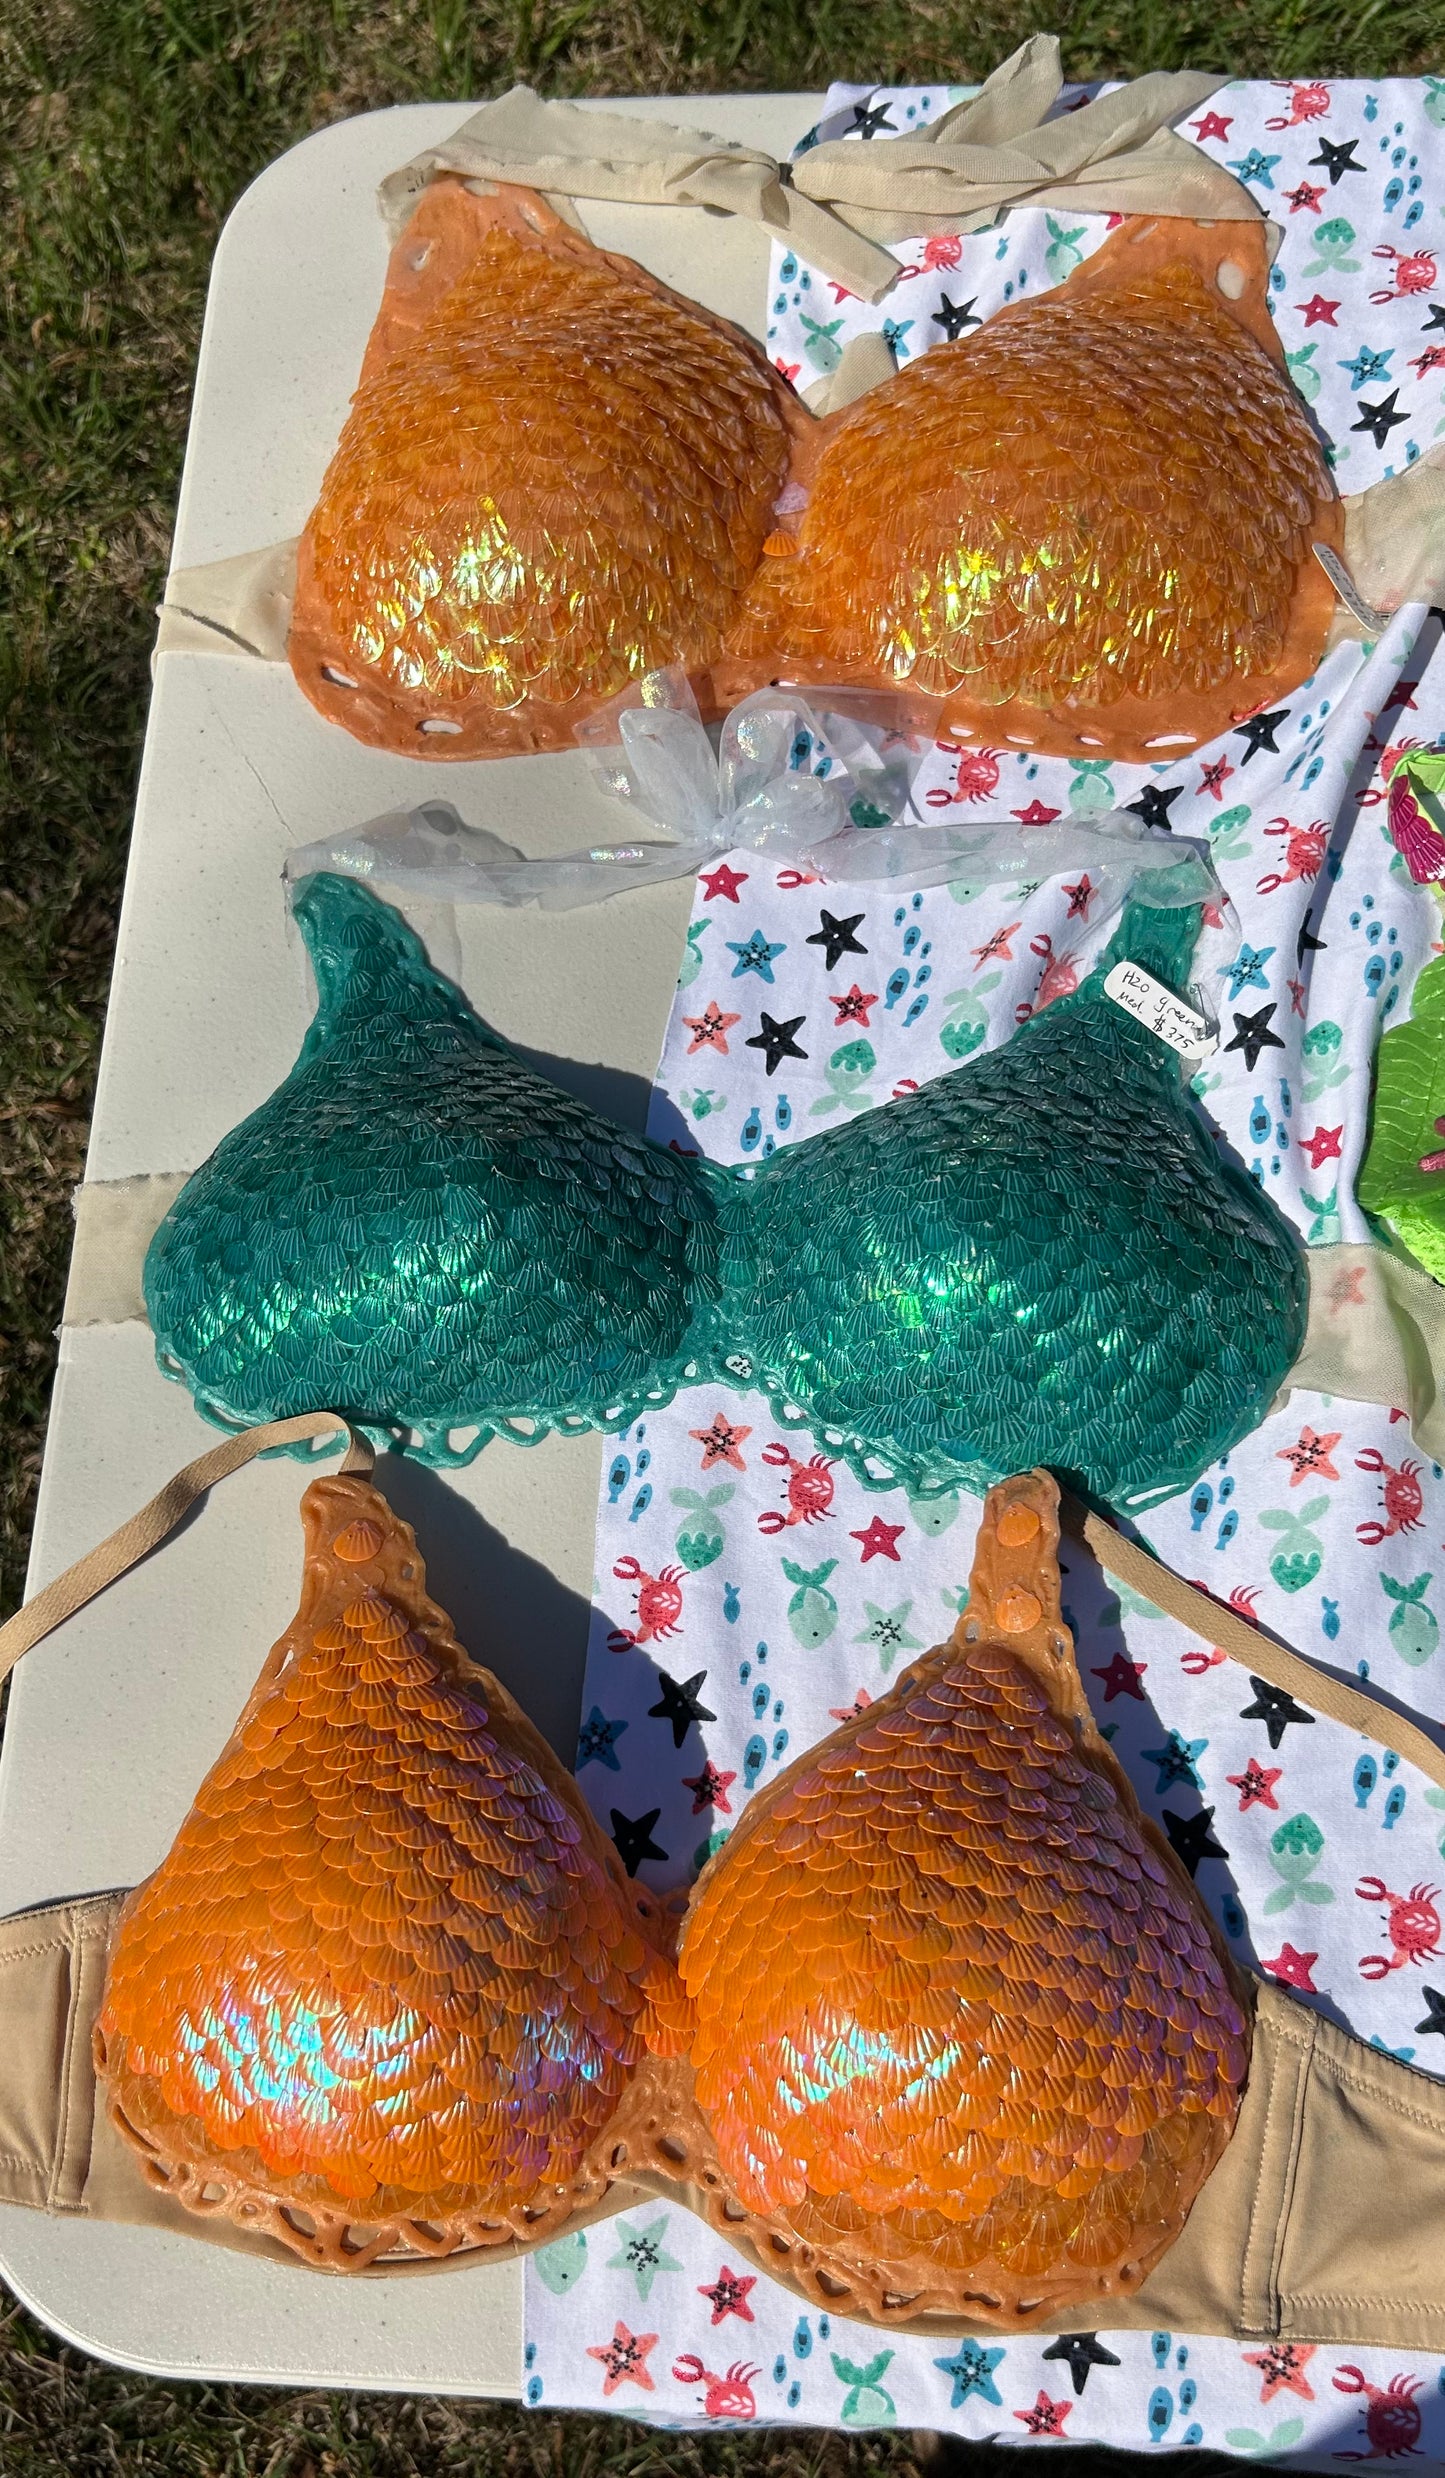 Scaled silicone mermaid top